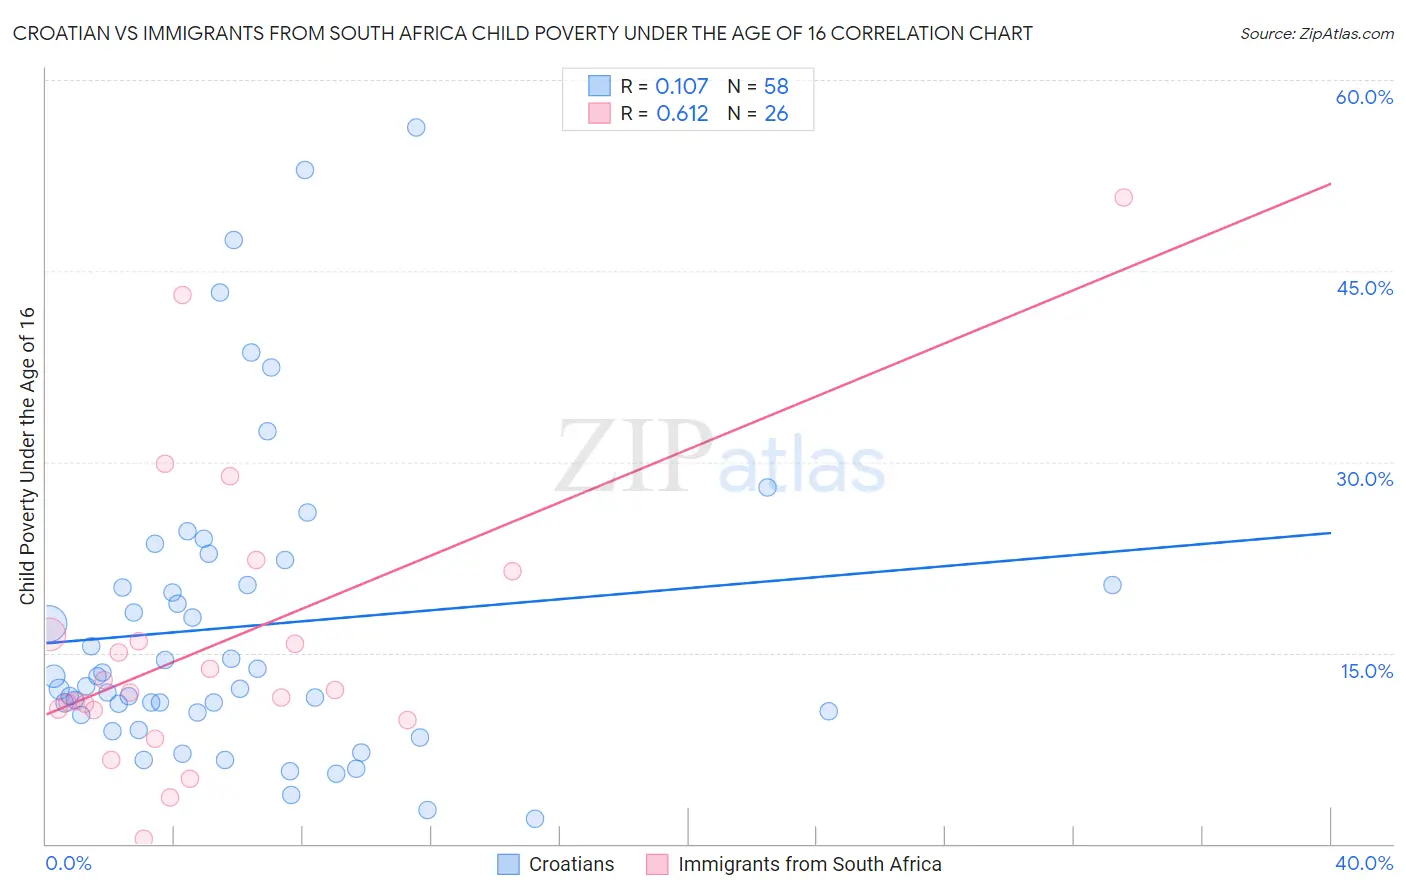 Croatian vs Immigrants from South Africa Child Poverty Under the Age of 16